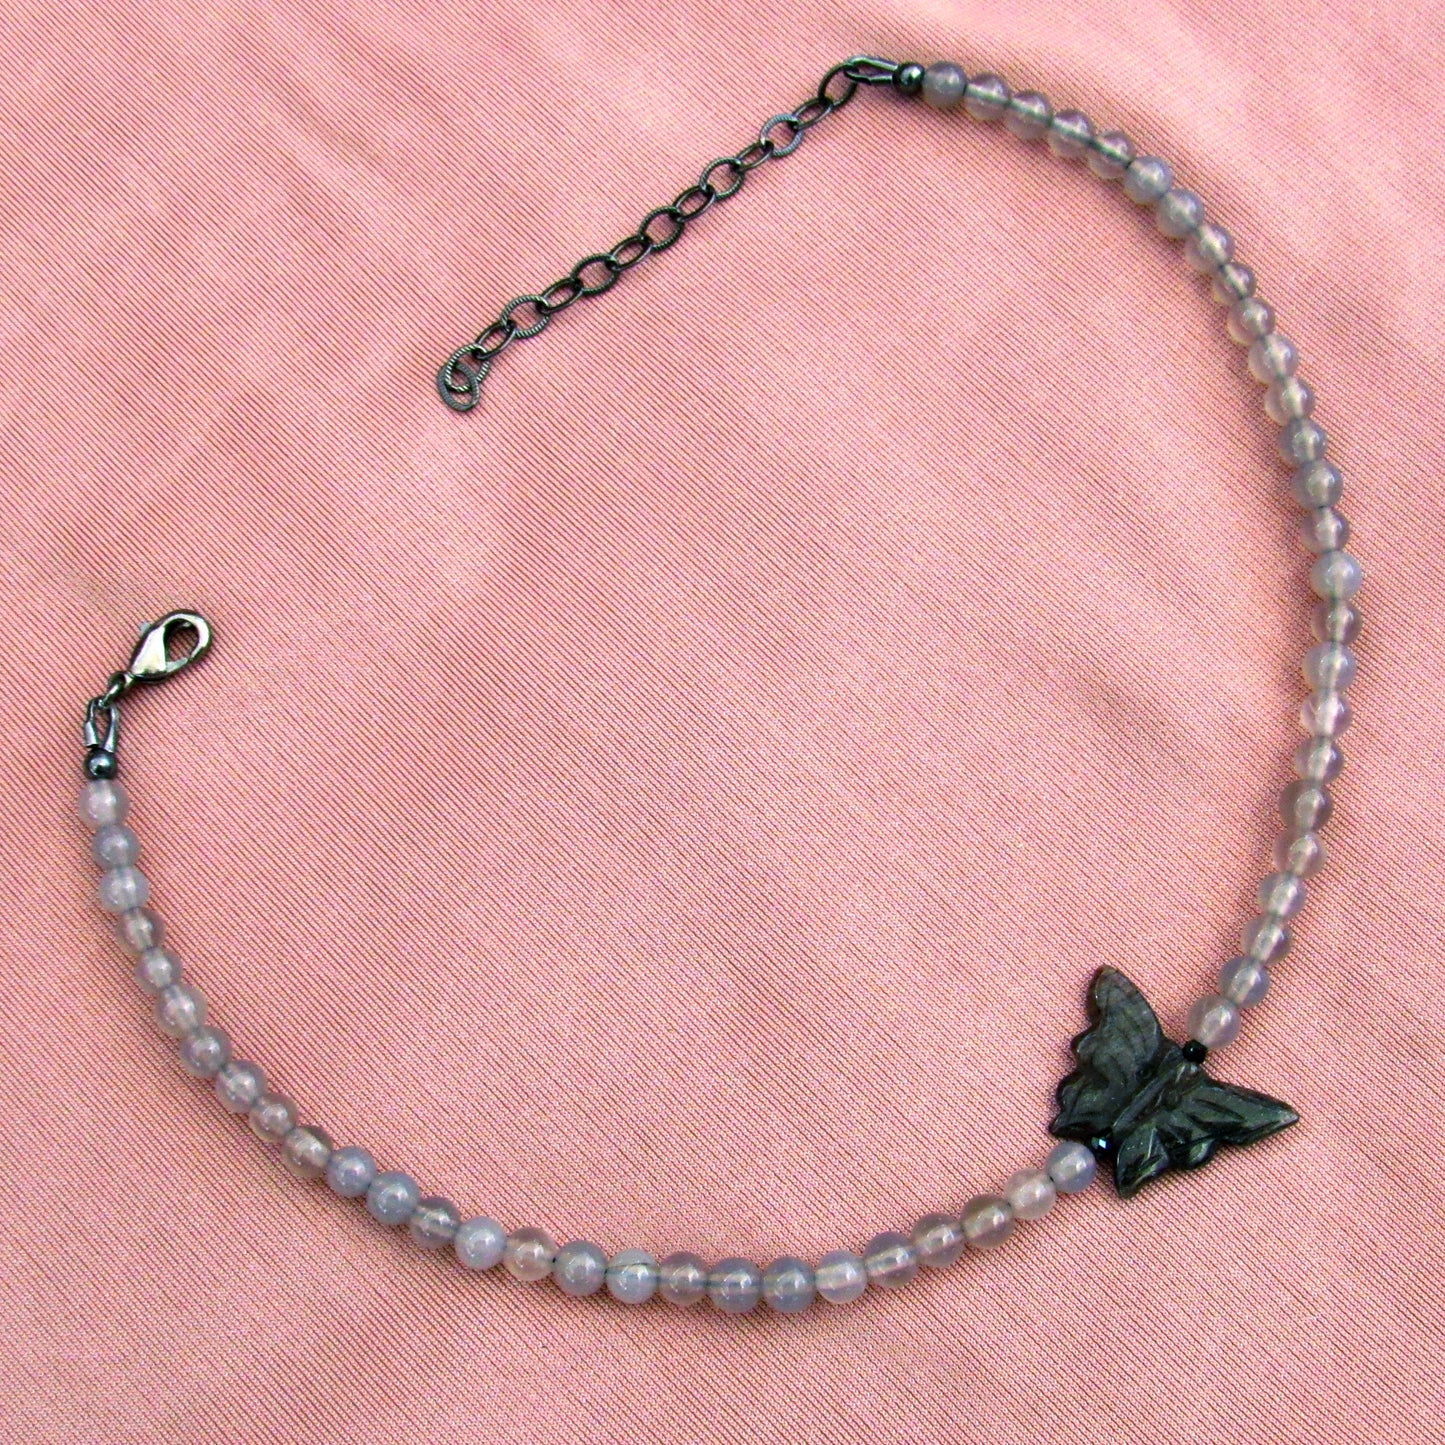 Black Aventurine Butterfly, Black Spinel, Grey Agates, and Oxidized Sterling Silver Anklet